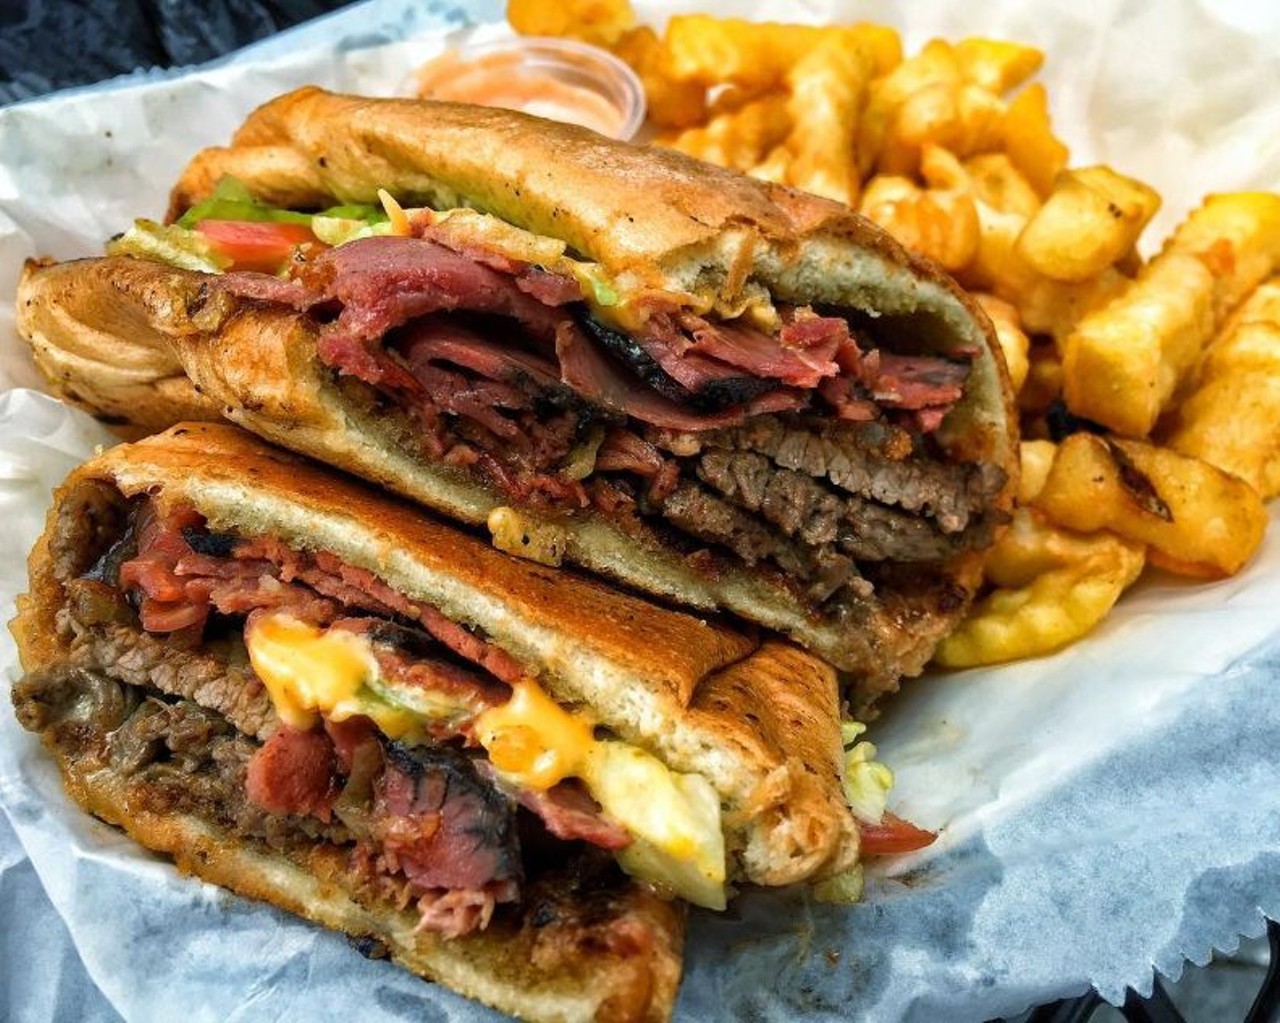 What we recommend: tripleta 
Instead of one meat, why not have three? A sandwich with ham, pastrami, steak, and the delicious sauces that make this a Puerto Rican favorite. This flavorful sandwich will fill you up.
Photo via jpknight/Instagram